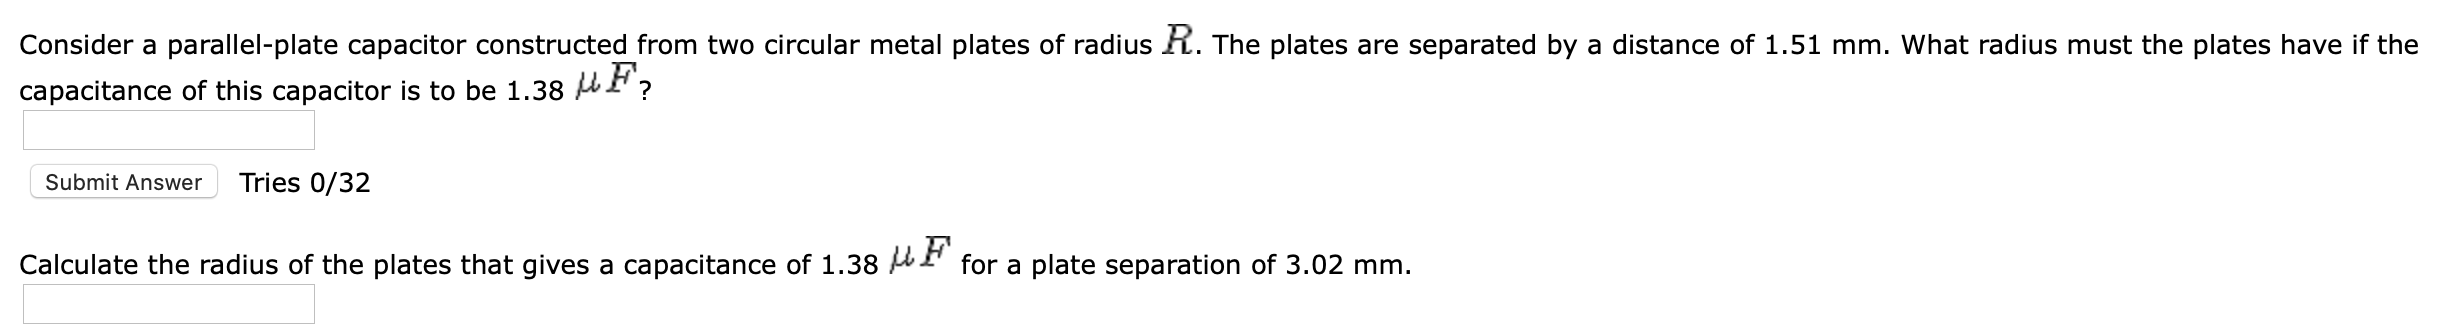 Consider a parallel-plate capacitor constructed from two circular metal plates of radius R. The plates are separated by a distance of 1.51 mm. What radius must the plates have if the
capacitance of this capacitor is to be 1.38 HF?
Submit Answer
Tries 0/32
Calculate the radius of the plates that gives a capacitance of 1.38 AI for a plate separation of 3.02 mm.
